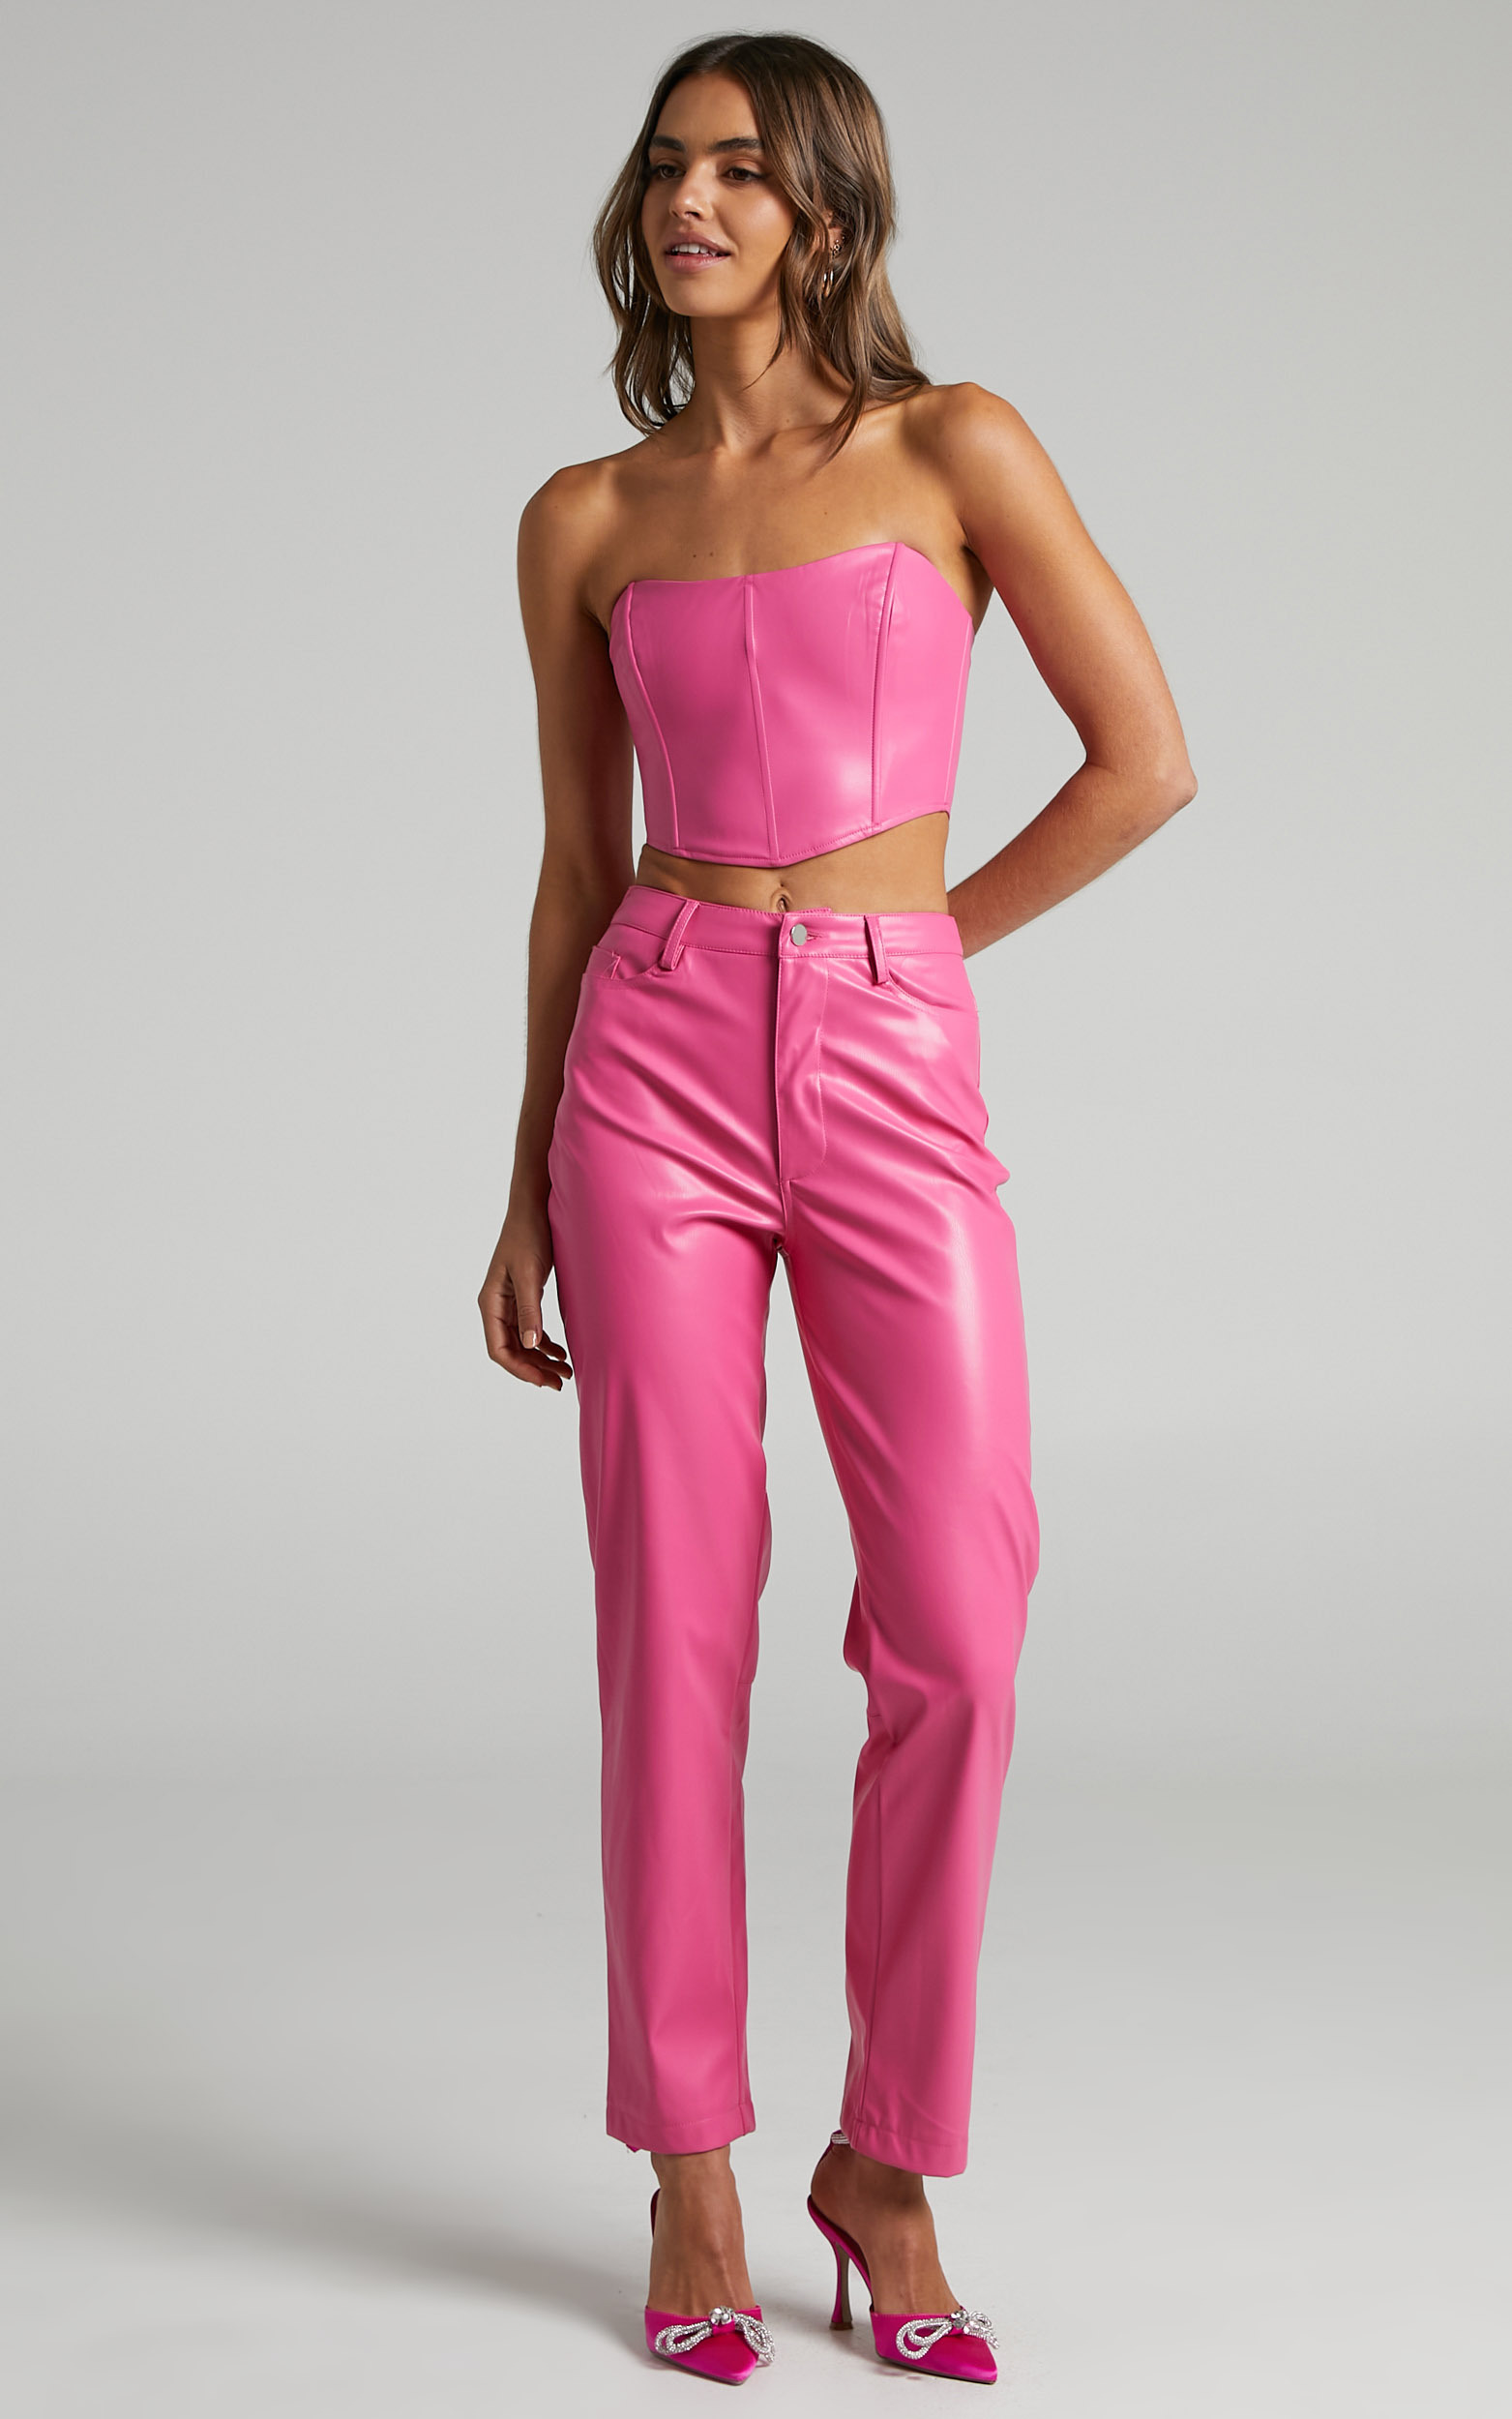 Lorrin Corset - Faux Leather Cropped Corset in Hot Pink | Showpo USA